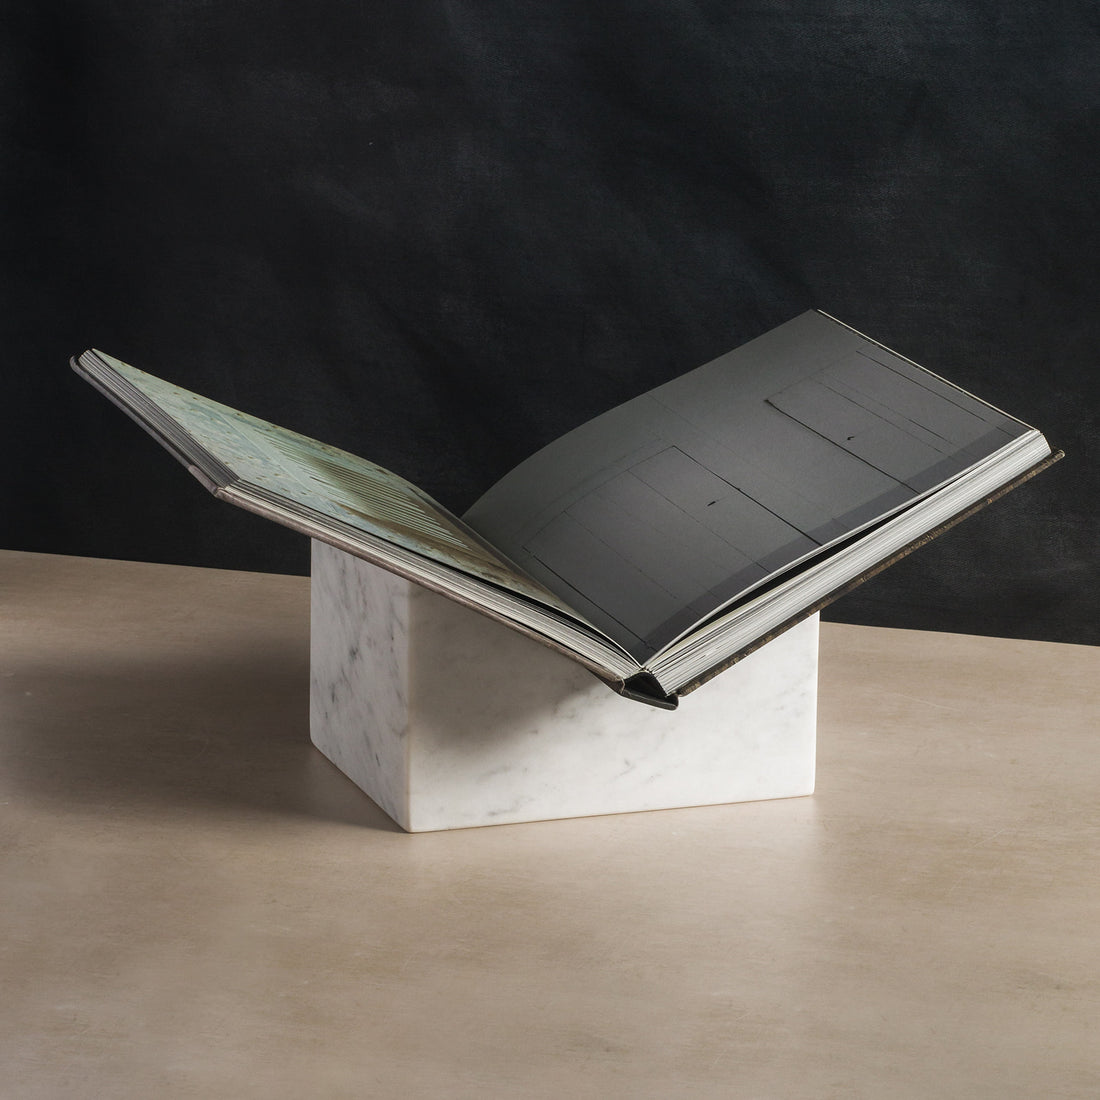 Studio H Collection Muse Stone Bookstand - White Marble